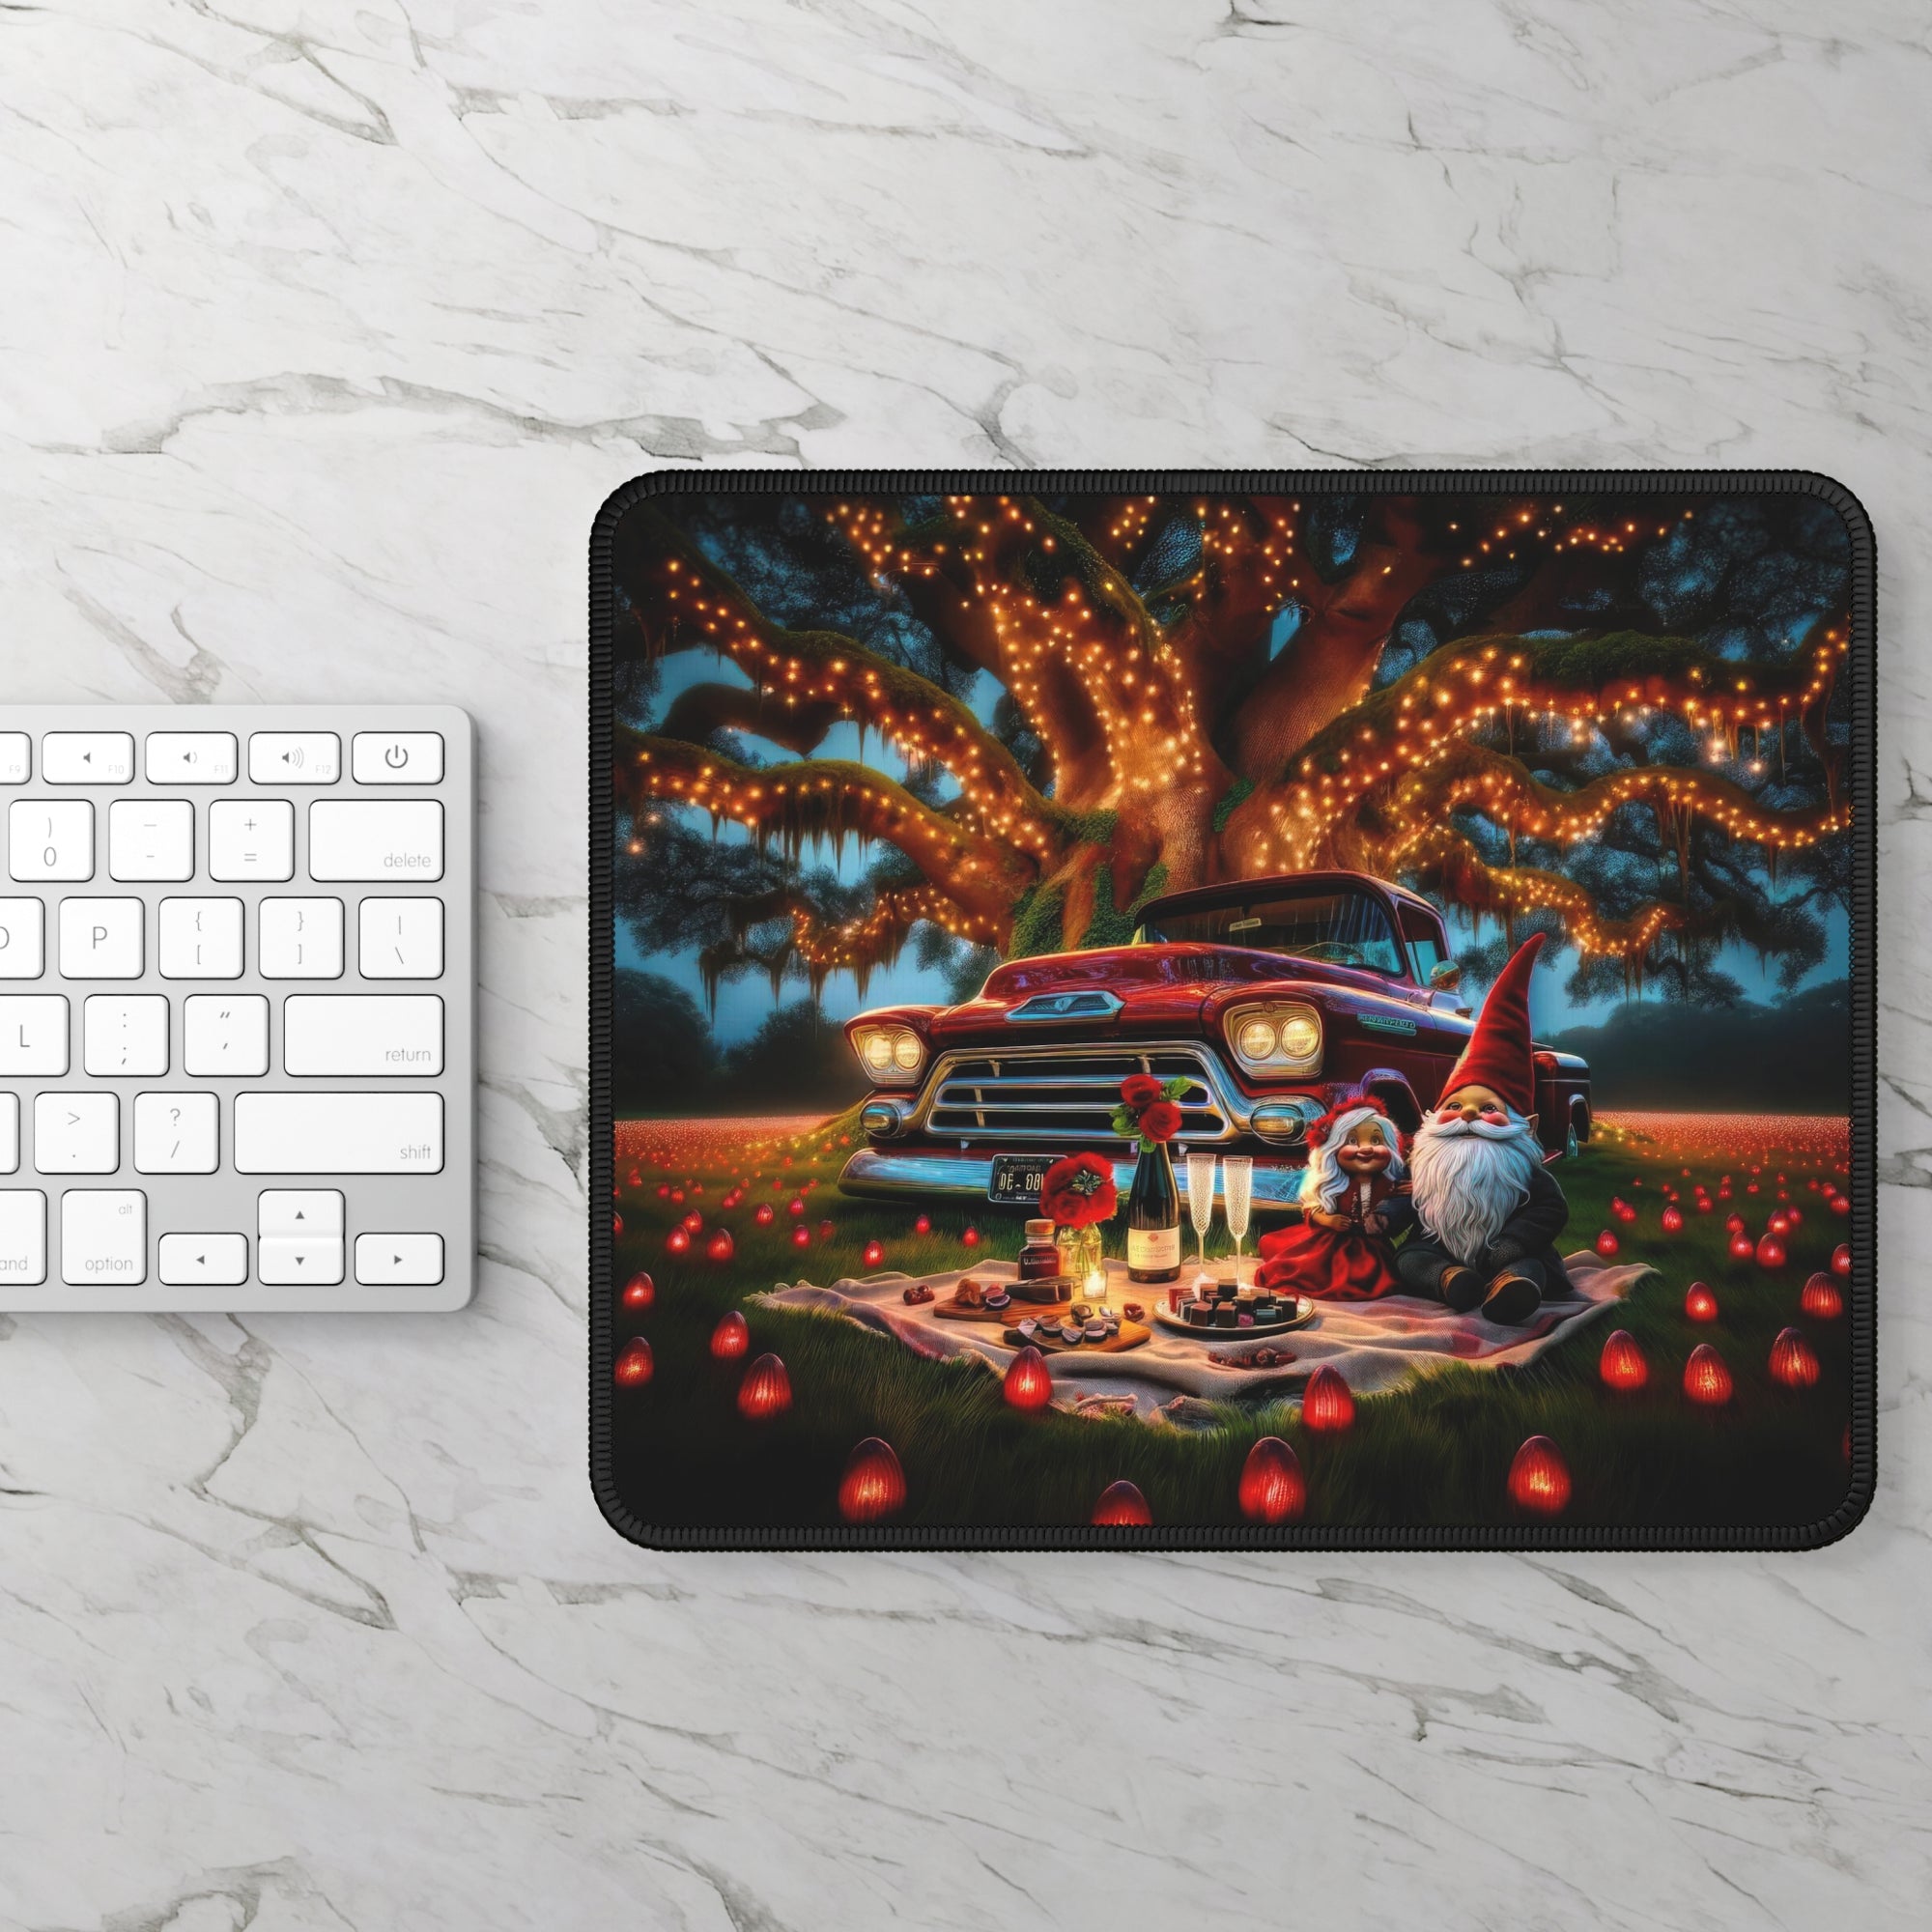 Lulu and Gigglefoot's Romantic Valentine Gaming Mouse Pad